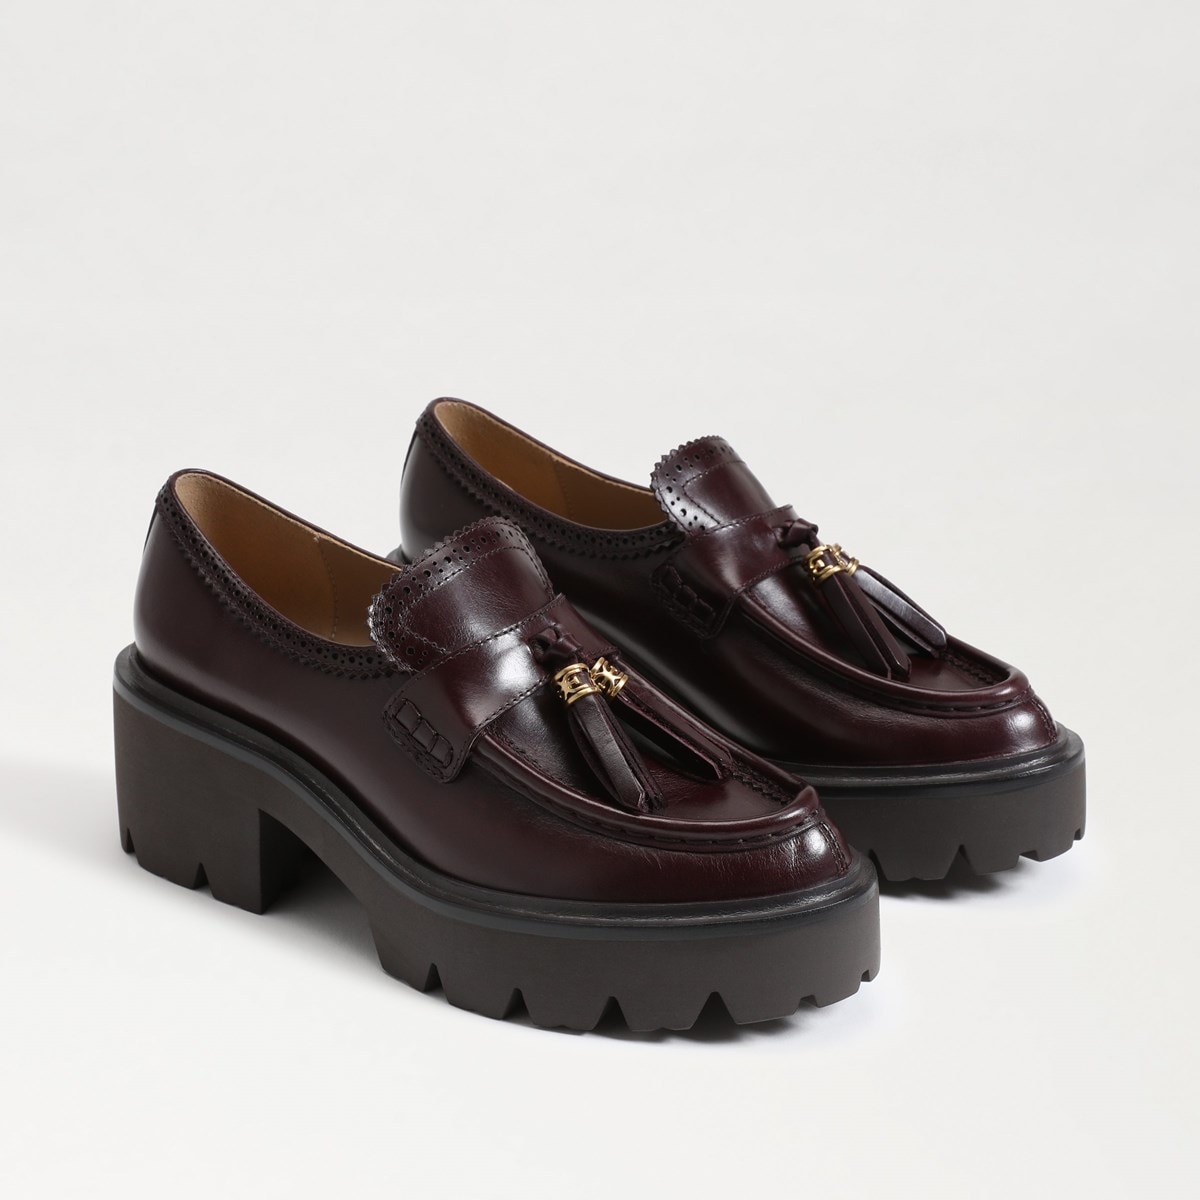 Sam Edelman Meela Loafer | Womens Flats and Loafers